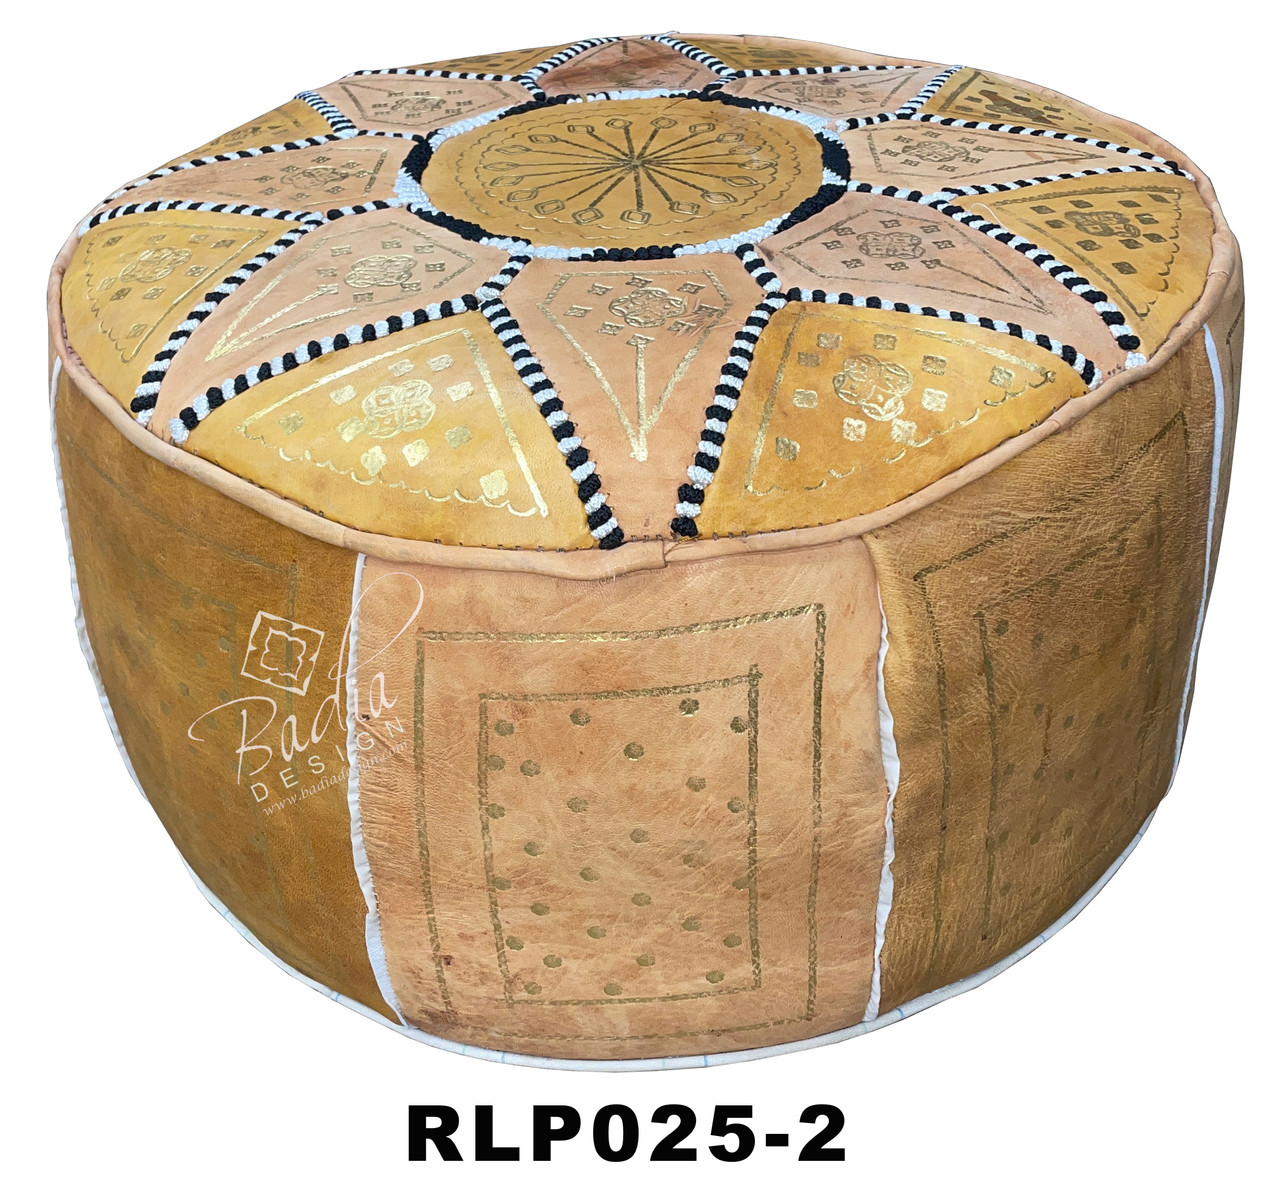 Round Moroccan Leather Pouf with Geometric Designs